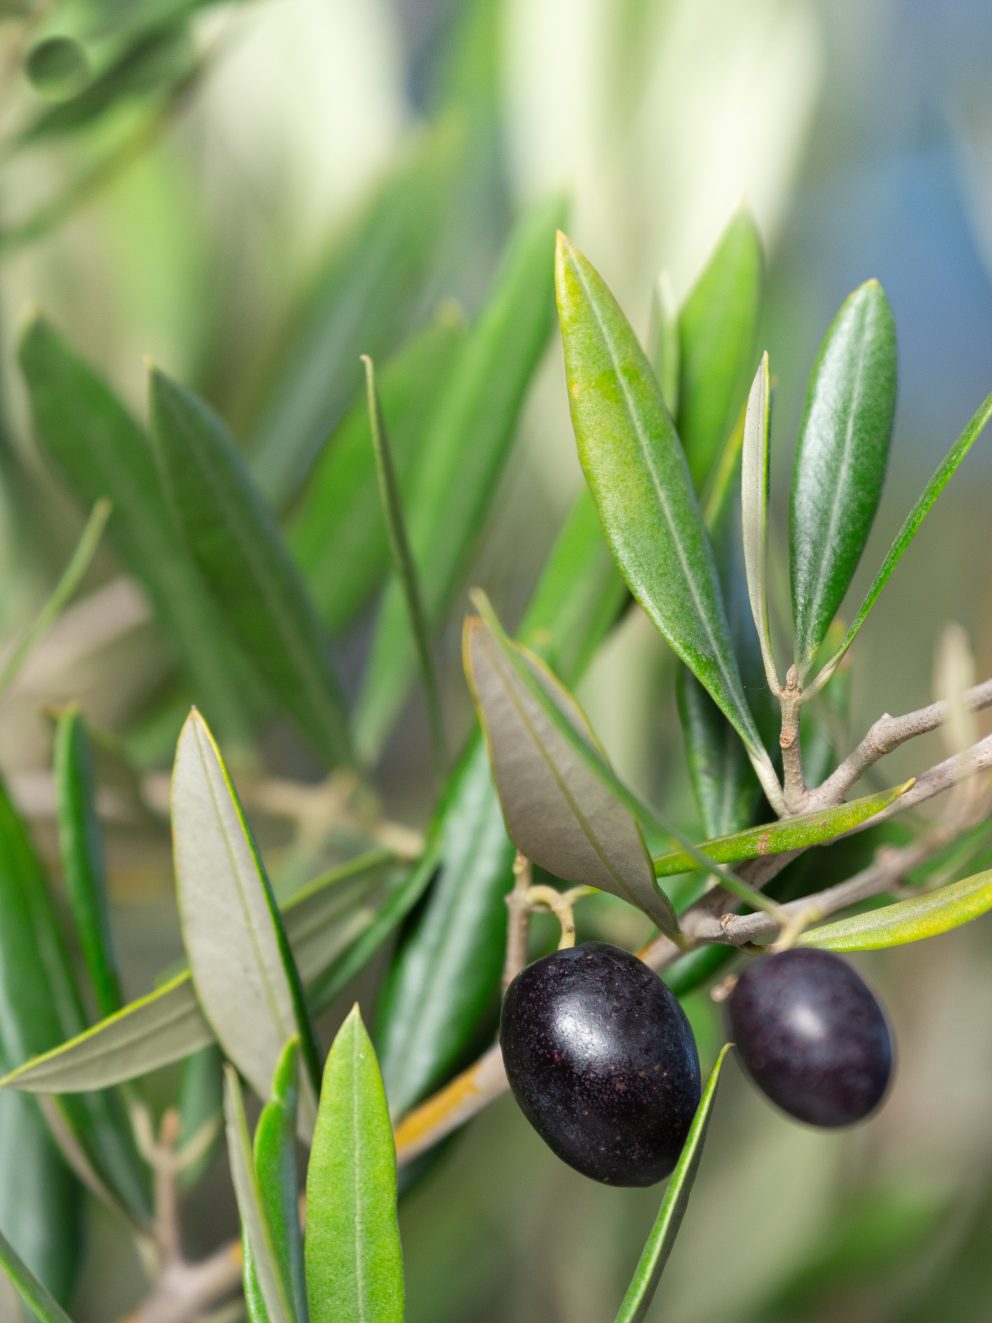 What beautiful olive trees, even bearing ripe olives. Already been greatly admired, fantastic service all round!